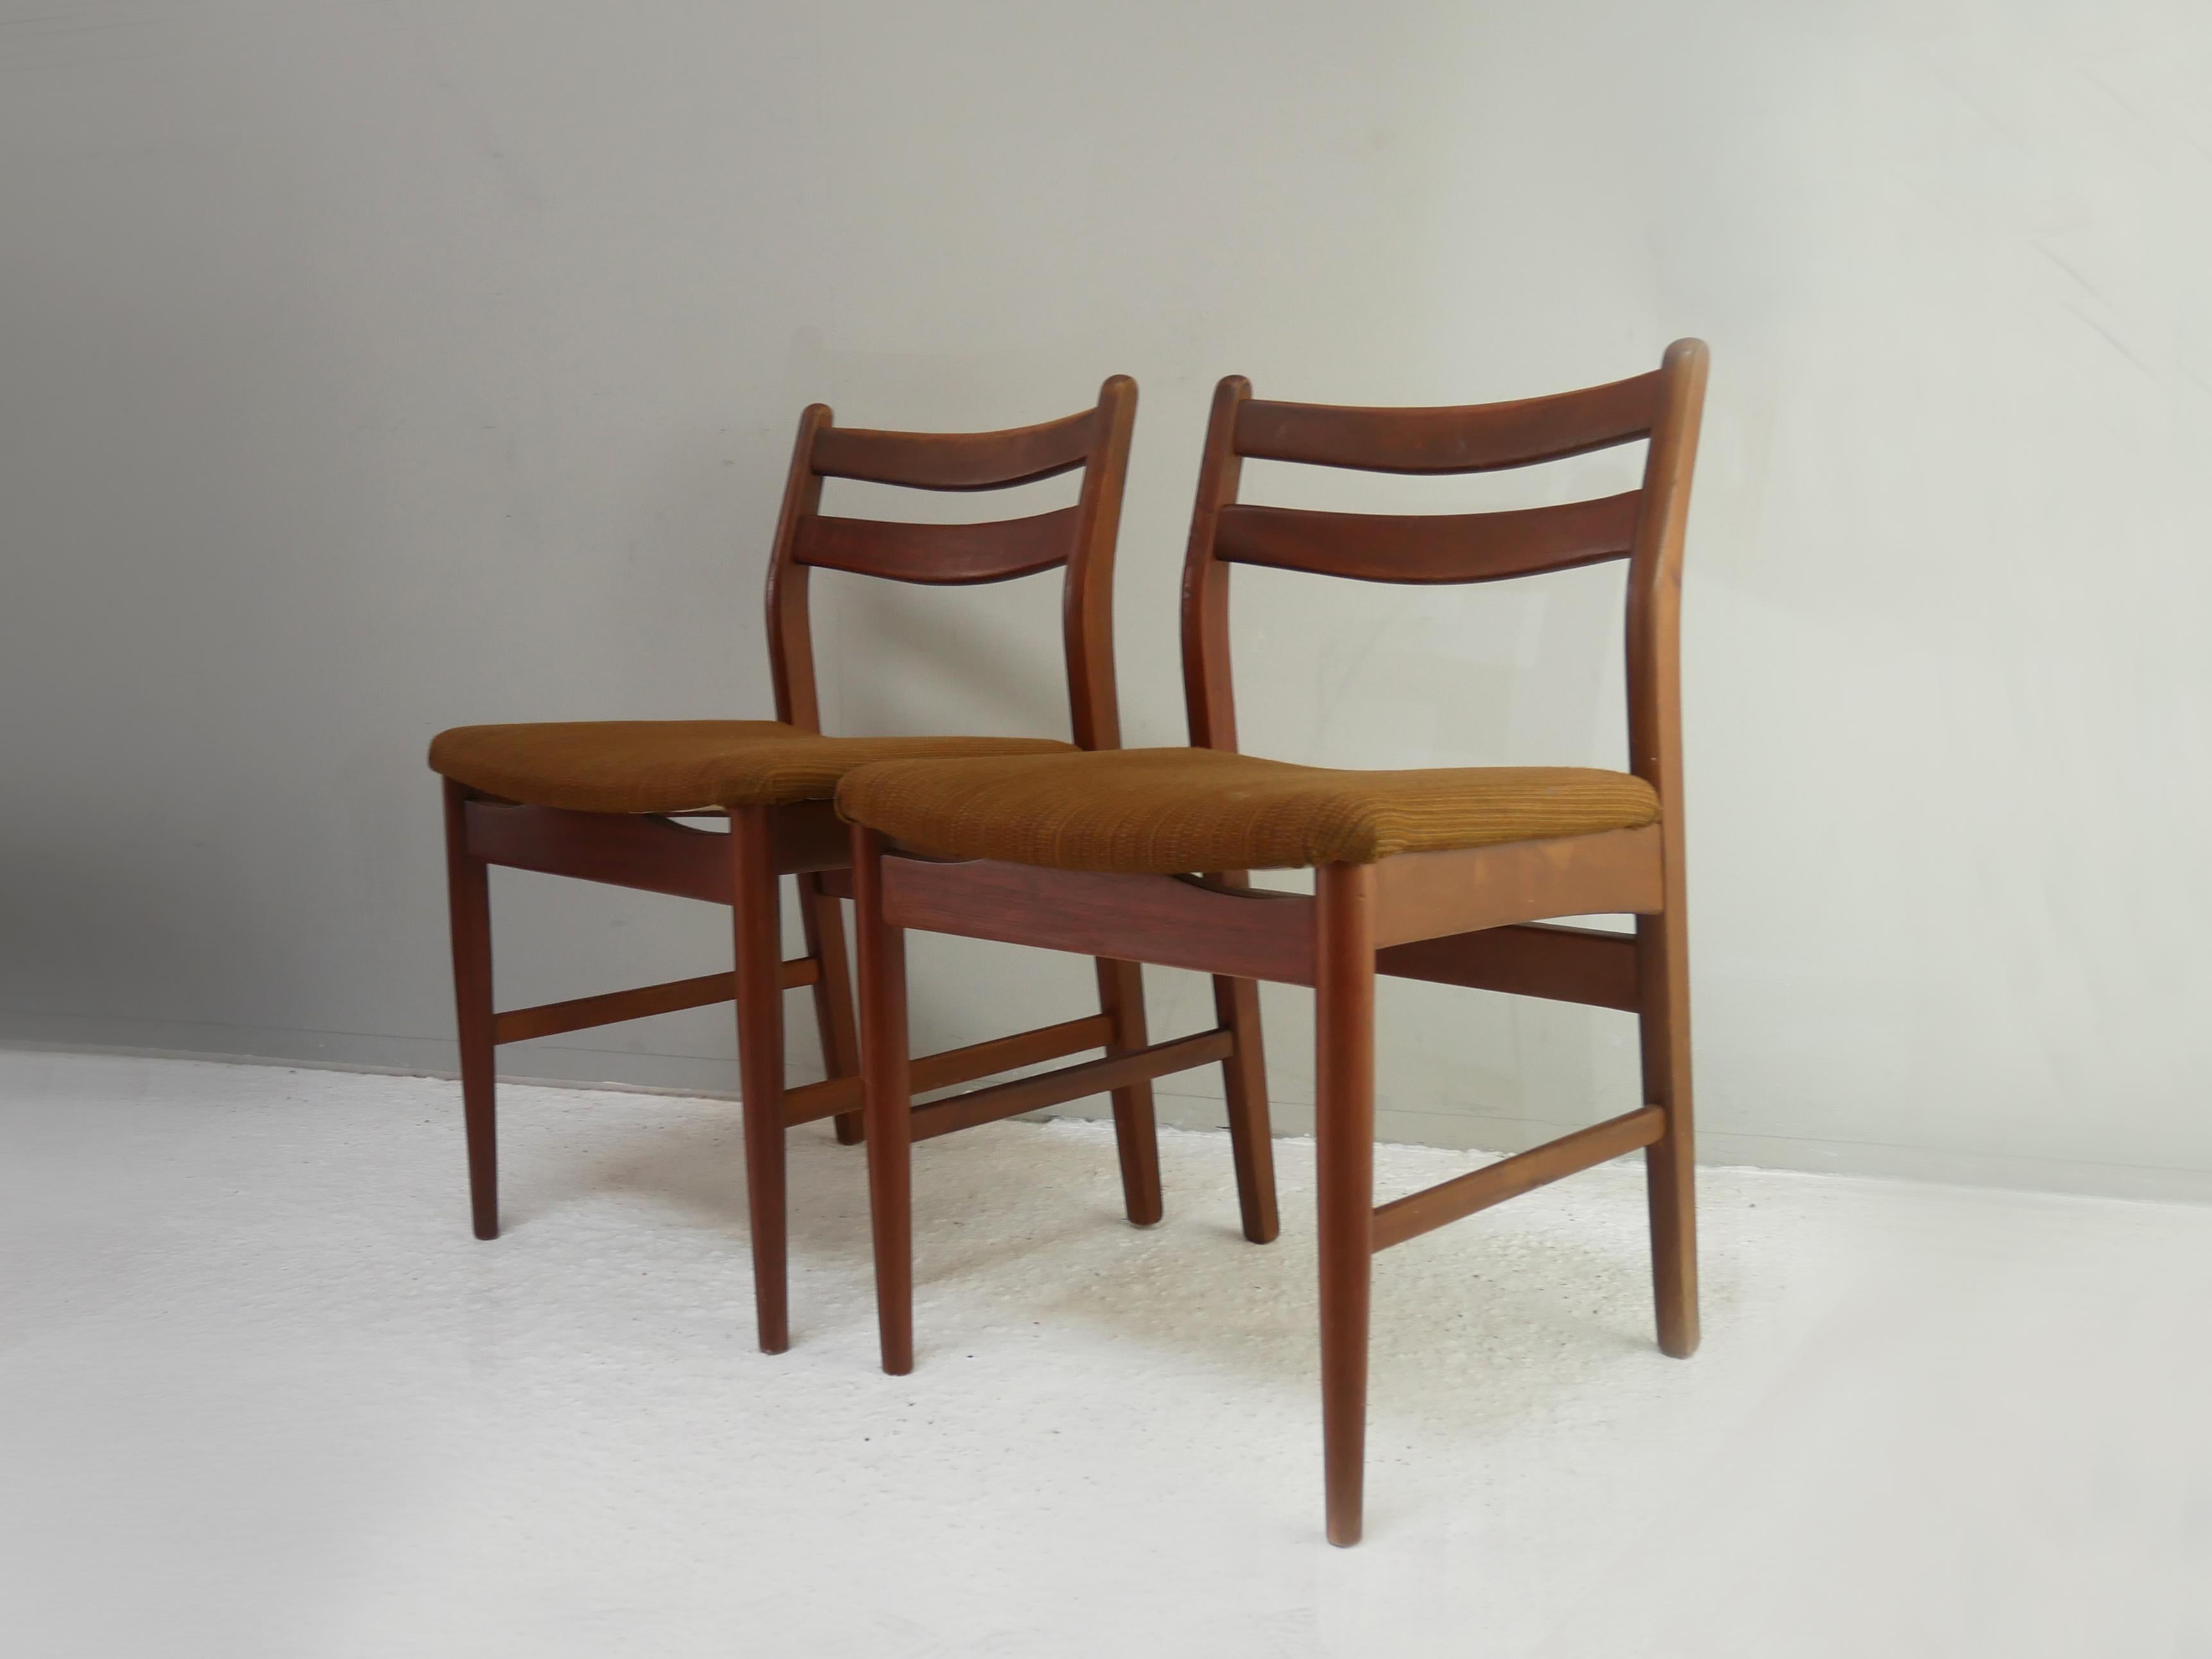 The price listed is for the one chair, there are 2 available

Solid teak dining chairs made in Denmark in the 1960’s. With the original brown woollen fabric upholstery. 

Size
Width 49cm
Depth 49cm
Height 72cm
Seat height